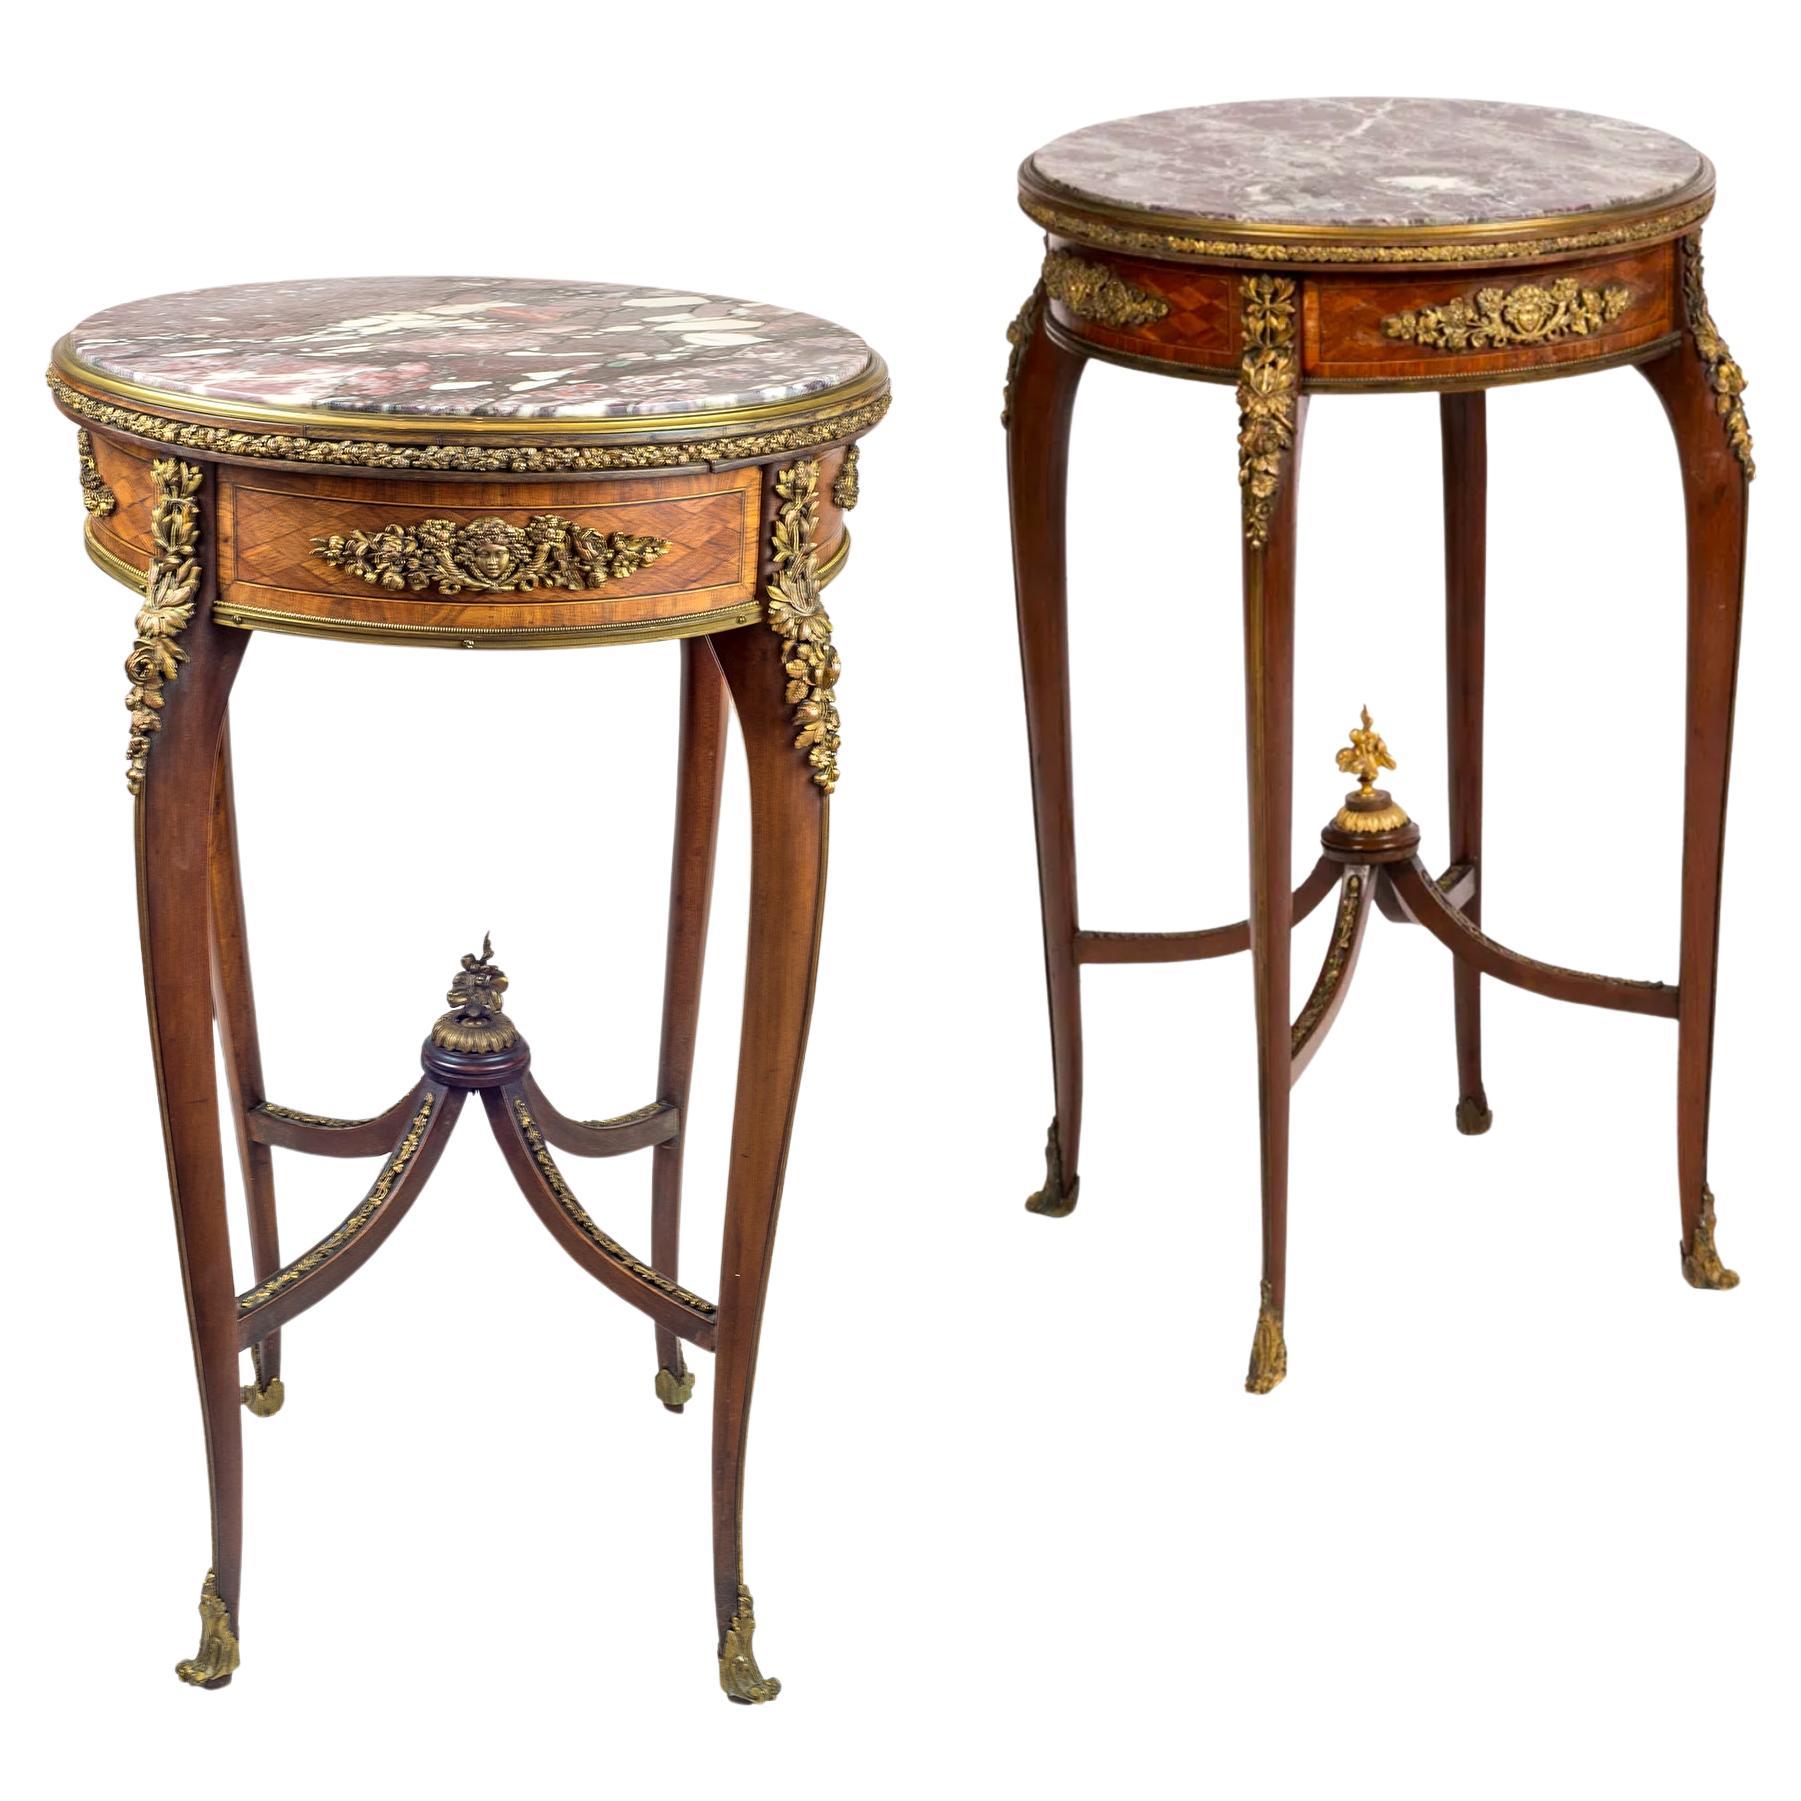 A Rare Pair of Louis XV-Style Marble Top Gueridon attributed to Francois Linke